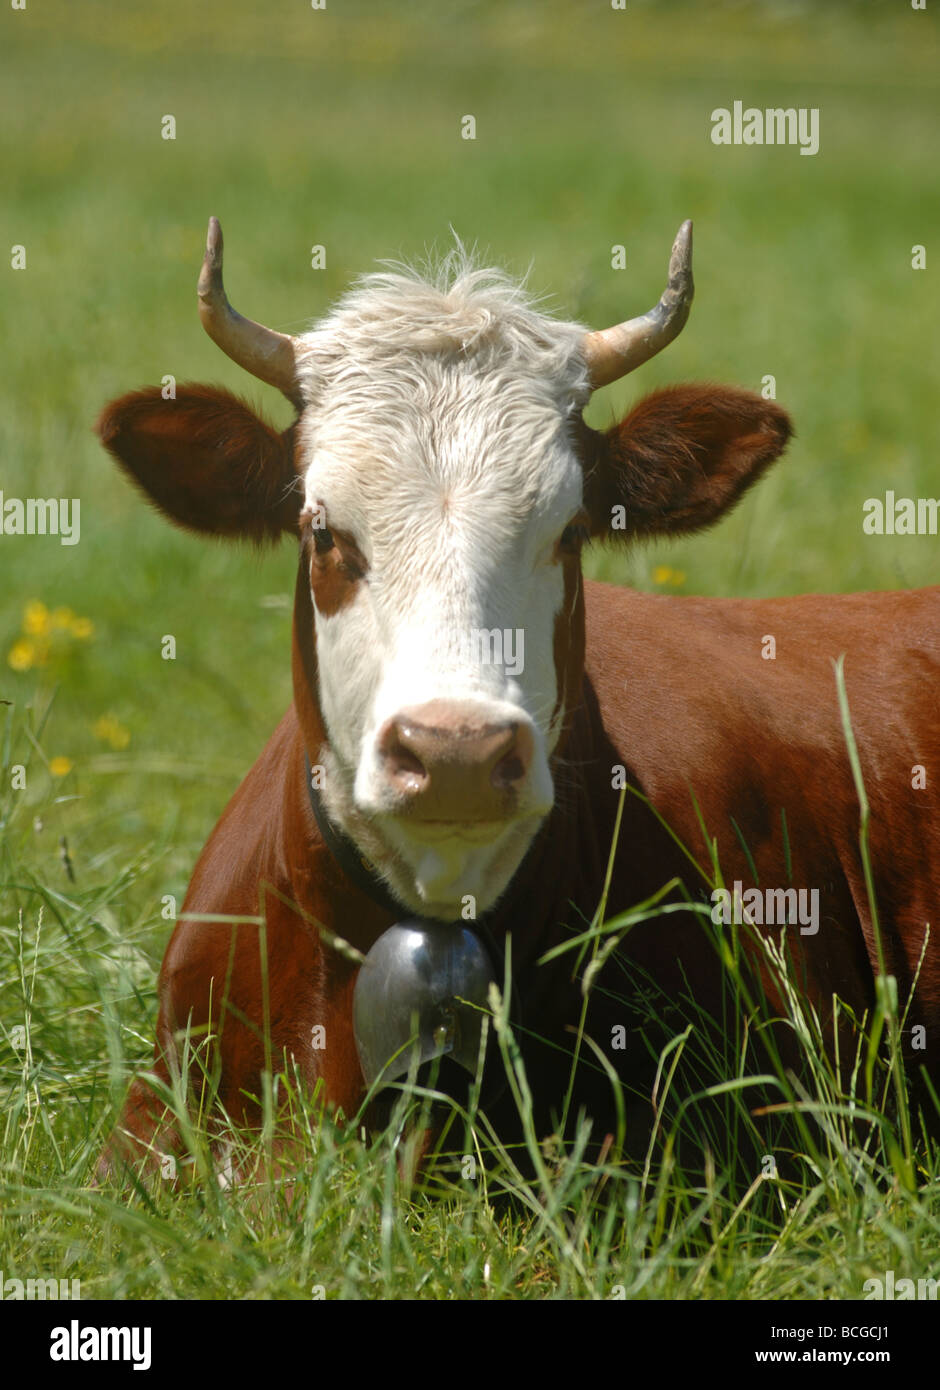 Cow, cattle Stock Photo